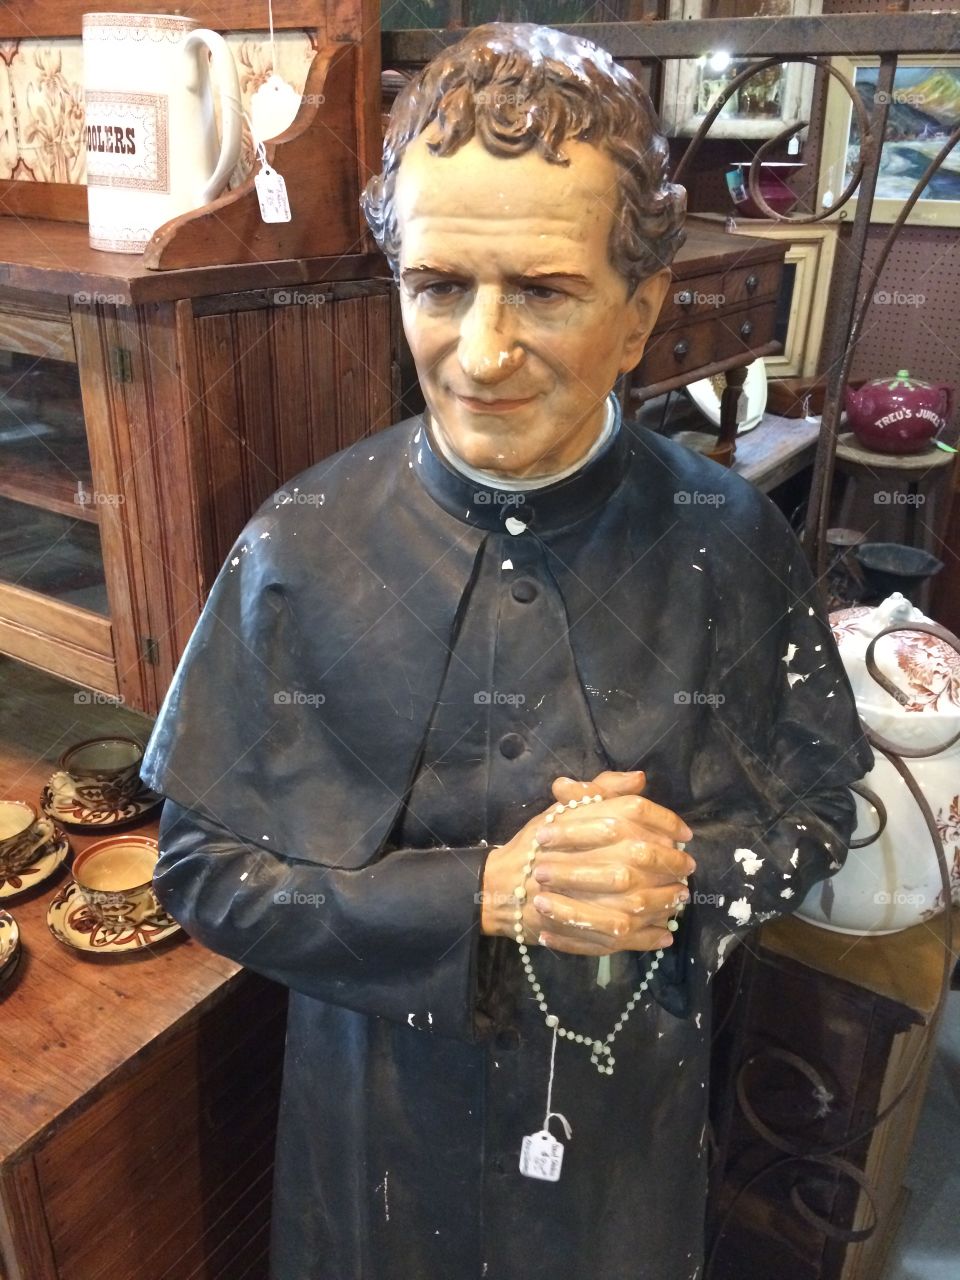 Father at the Antique Shop. This was an interesting piece